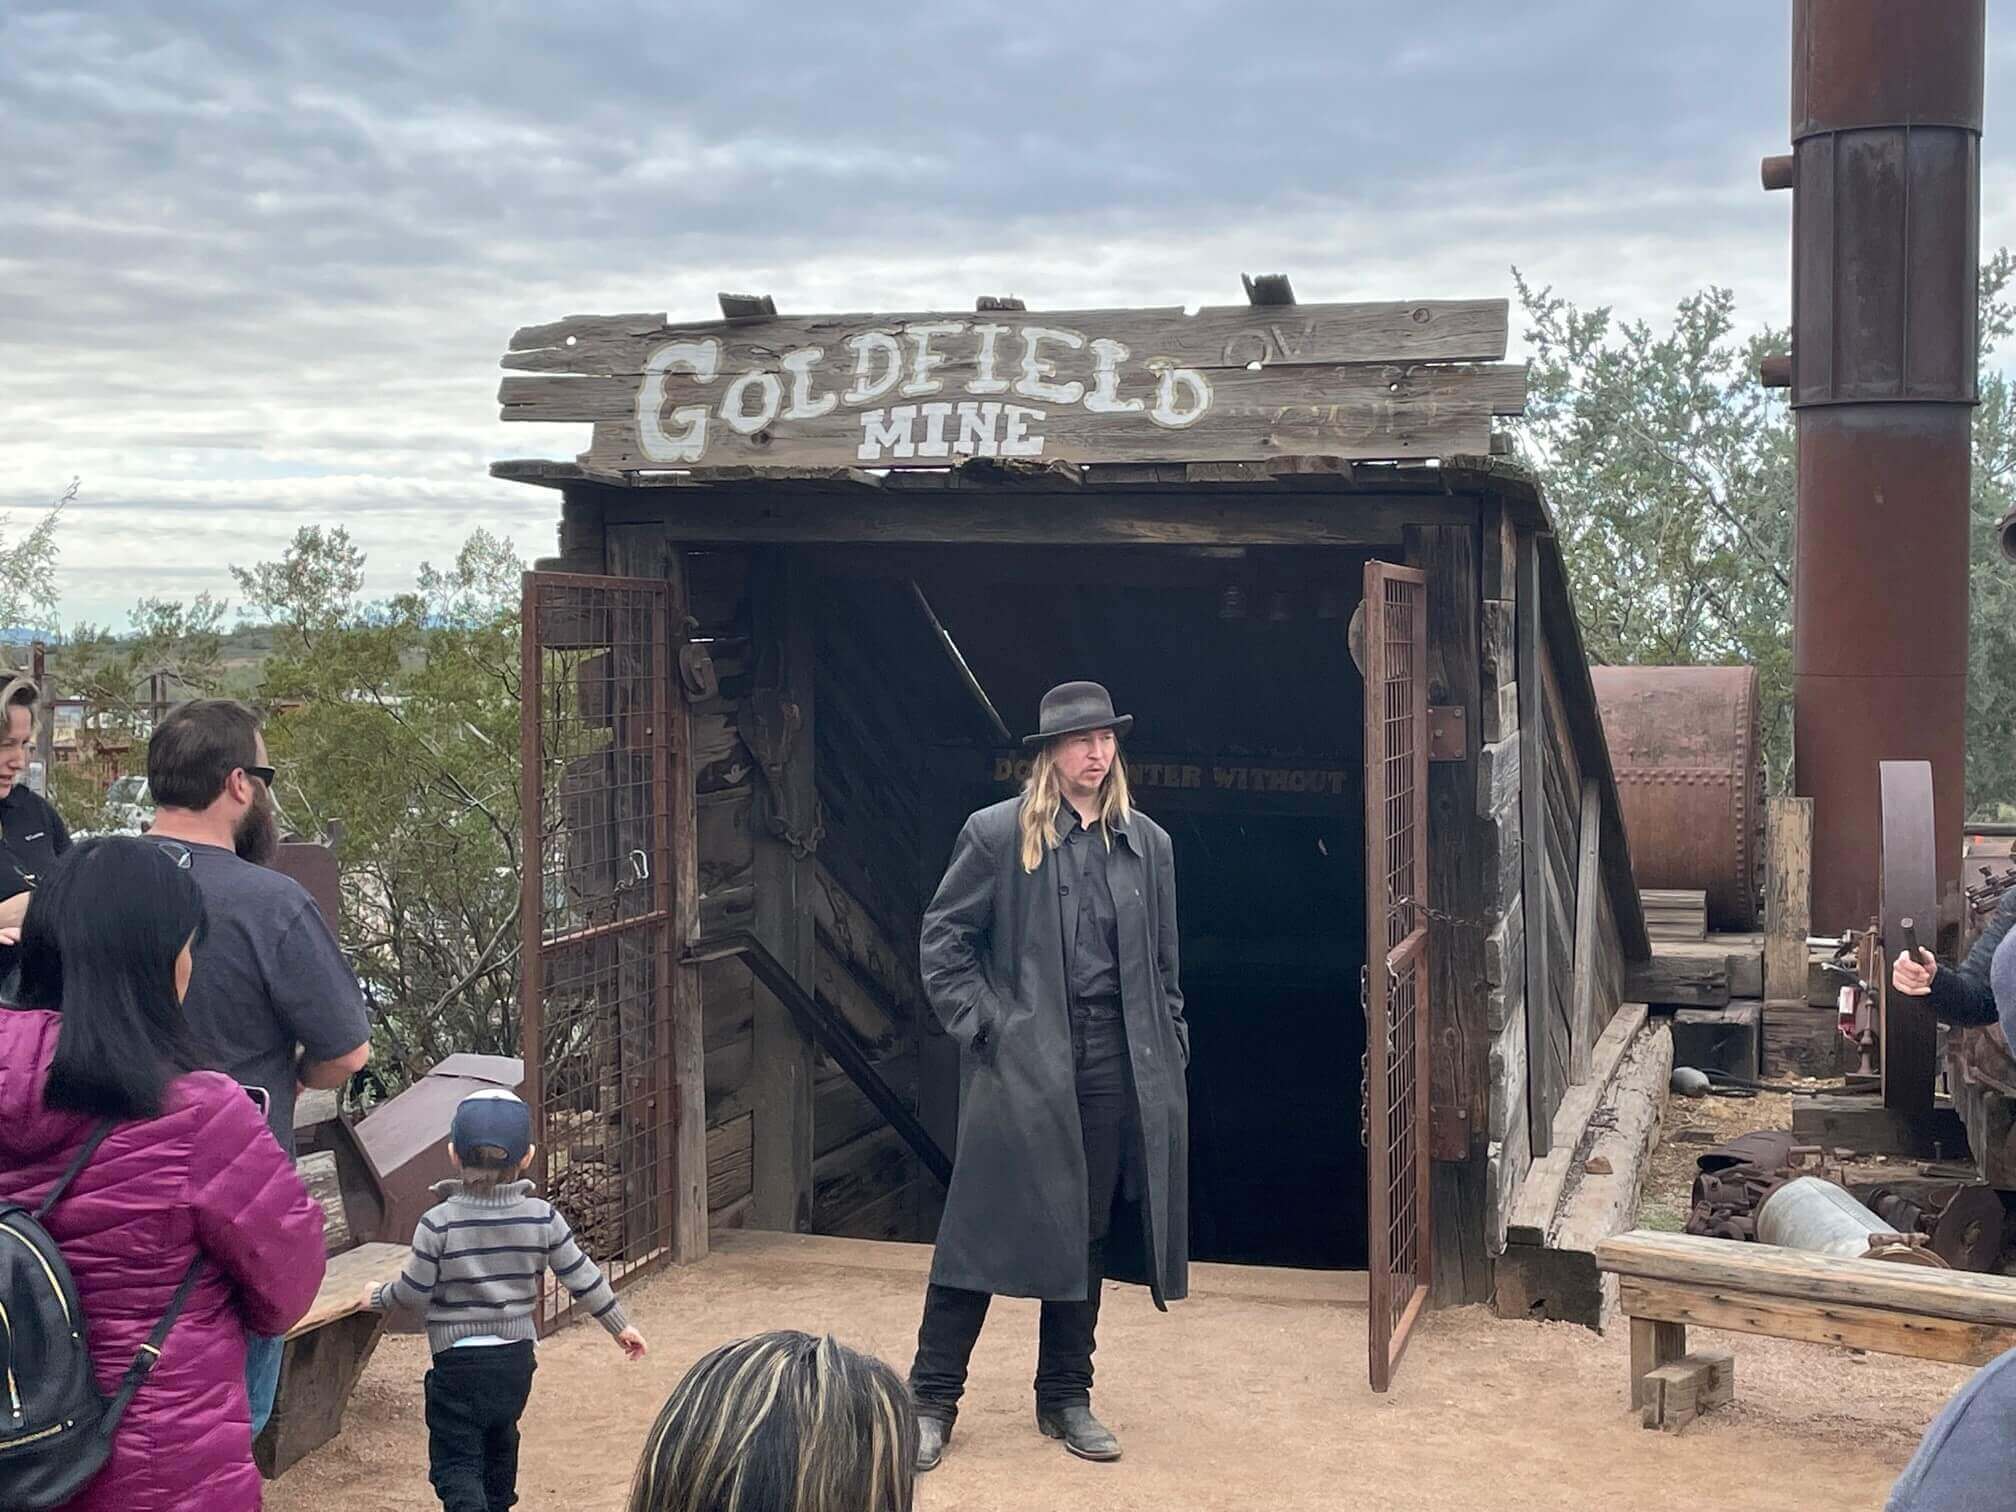 A tour guide stands before an entrance to the Goldfield mine.